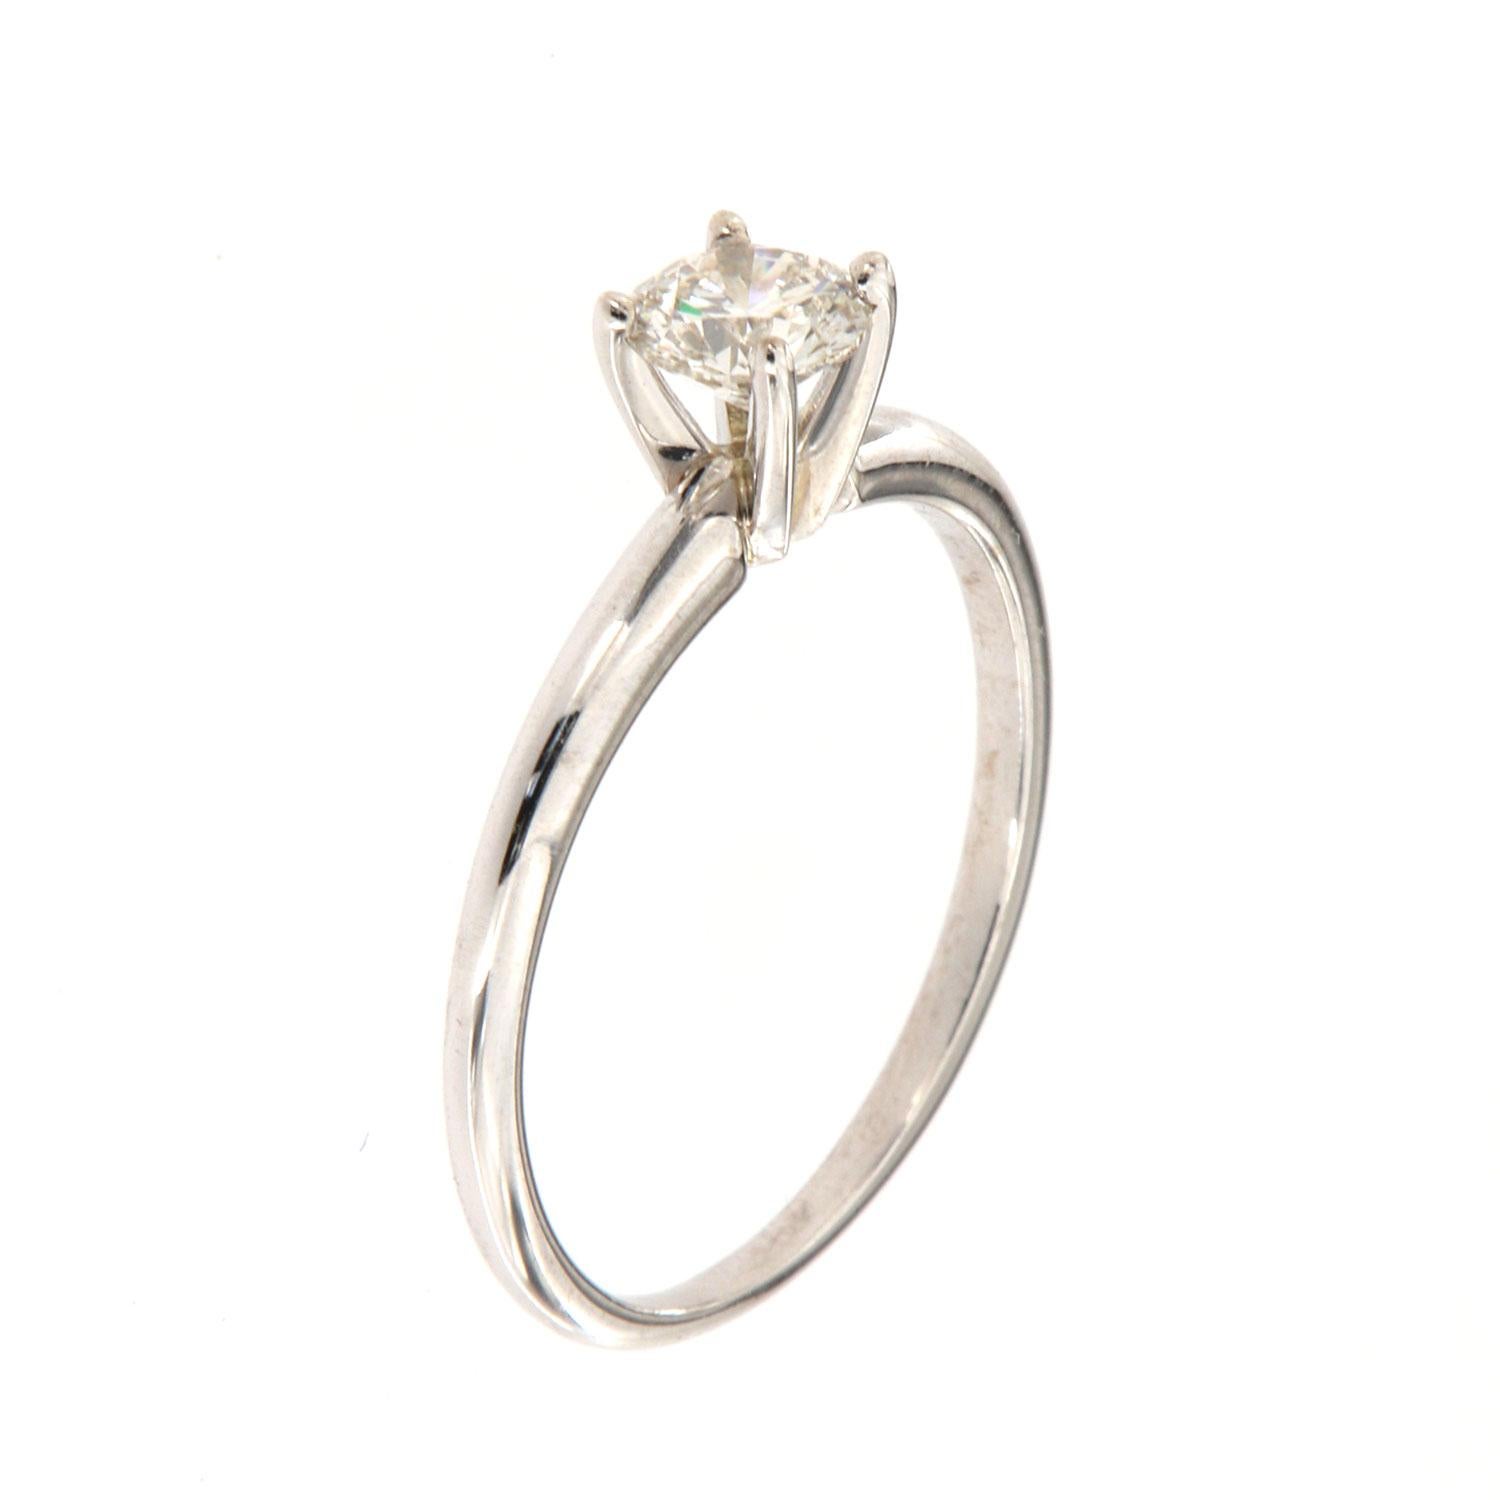 This classic solitaire 14k white gold ring features a 0.50 Carat round brilliant diamond four (4) prongs set on a 2 mm wide band. It's 100% eye clean, face-up white with an excellent luster. The Center diamond is GIA certified.  Color: J Clarity: